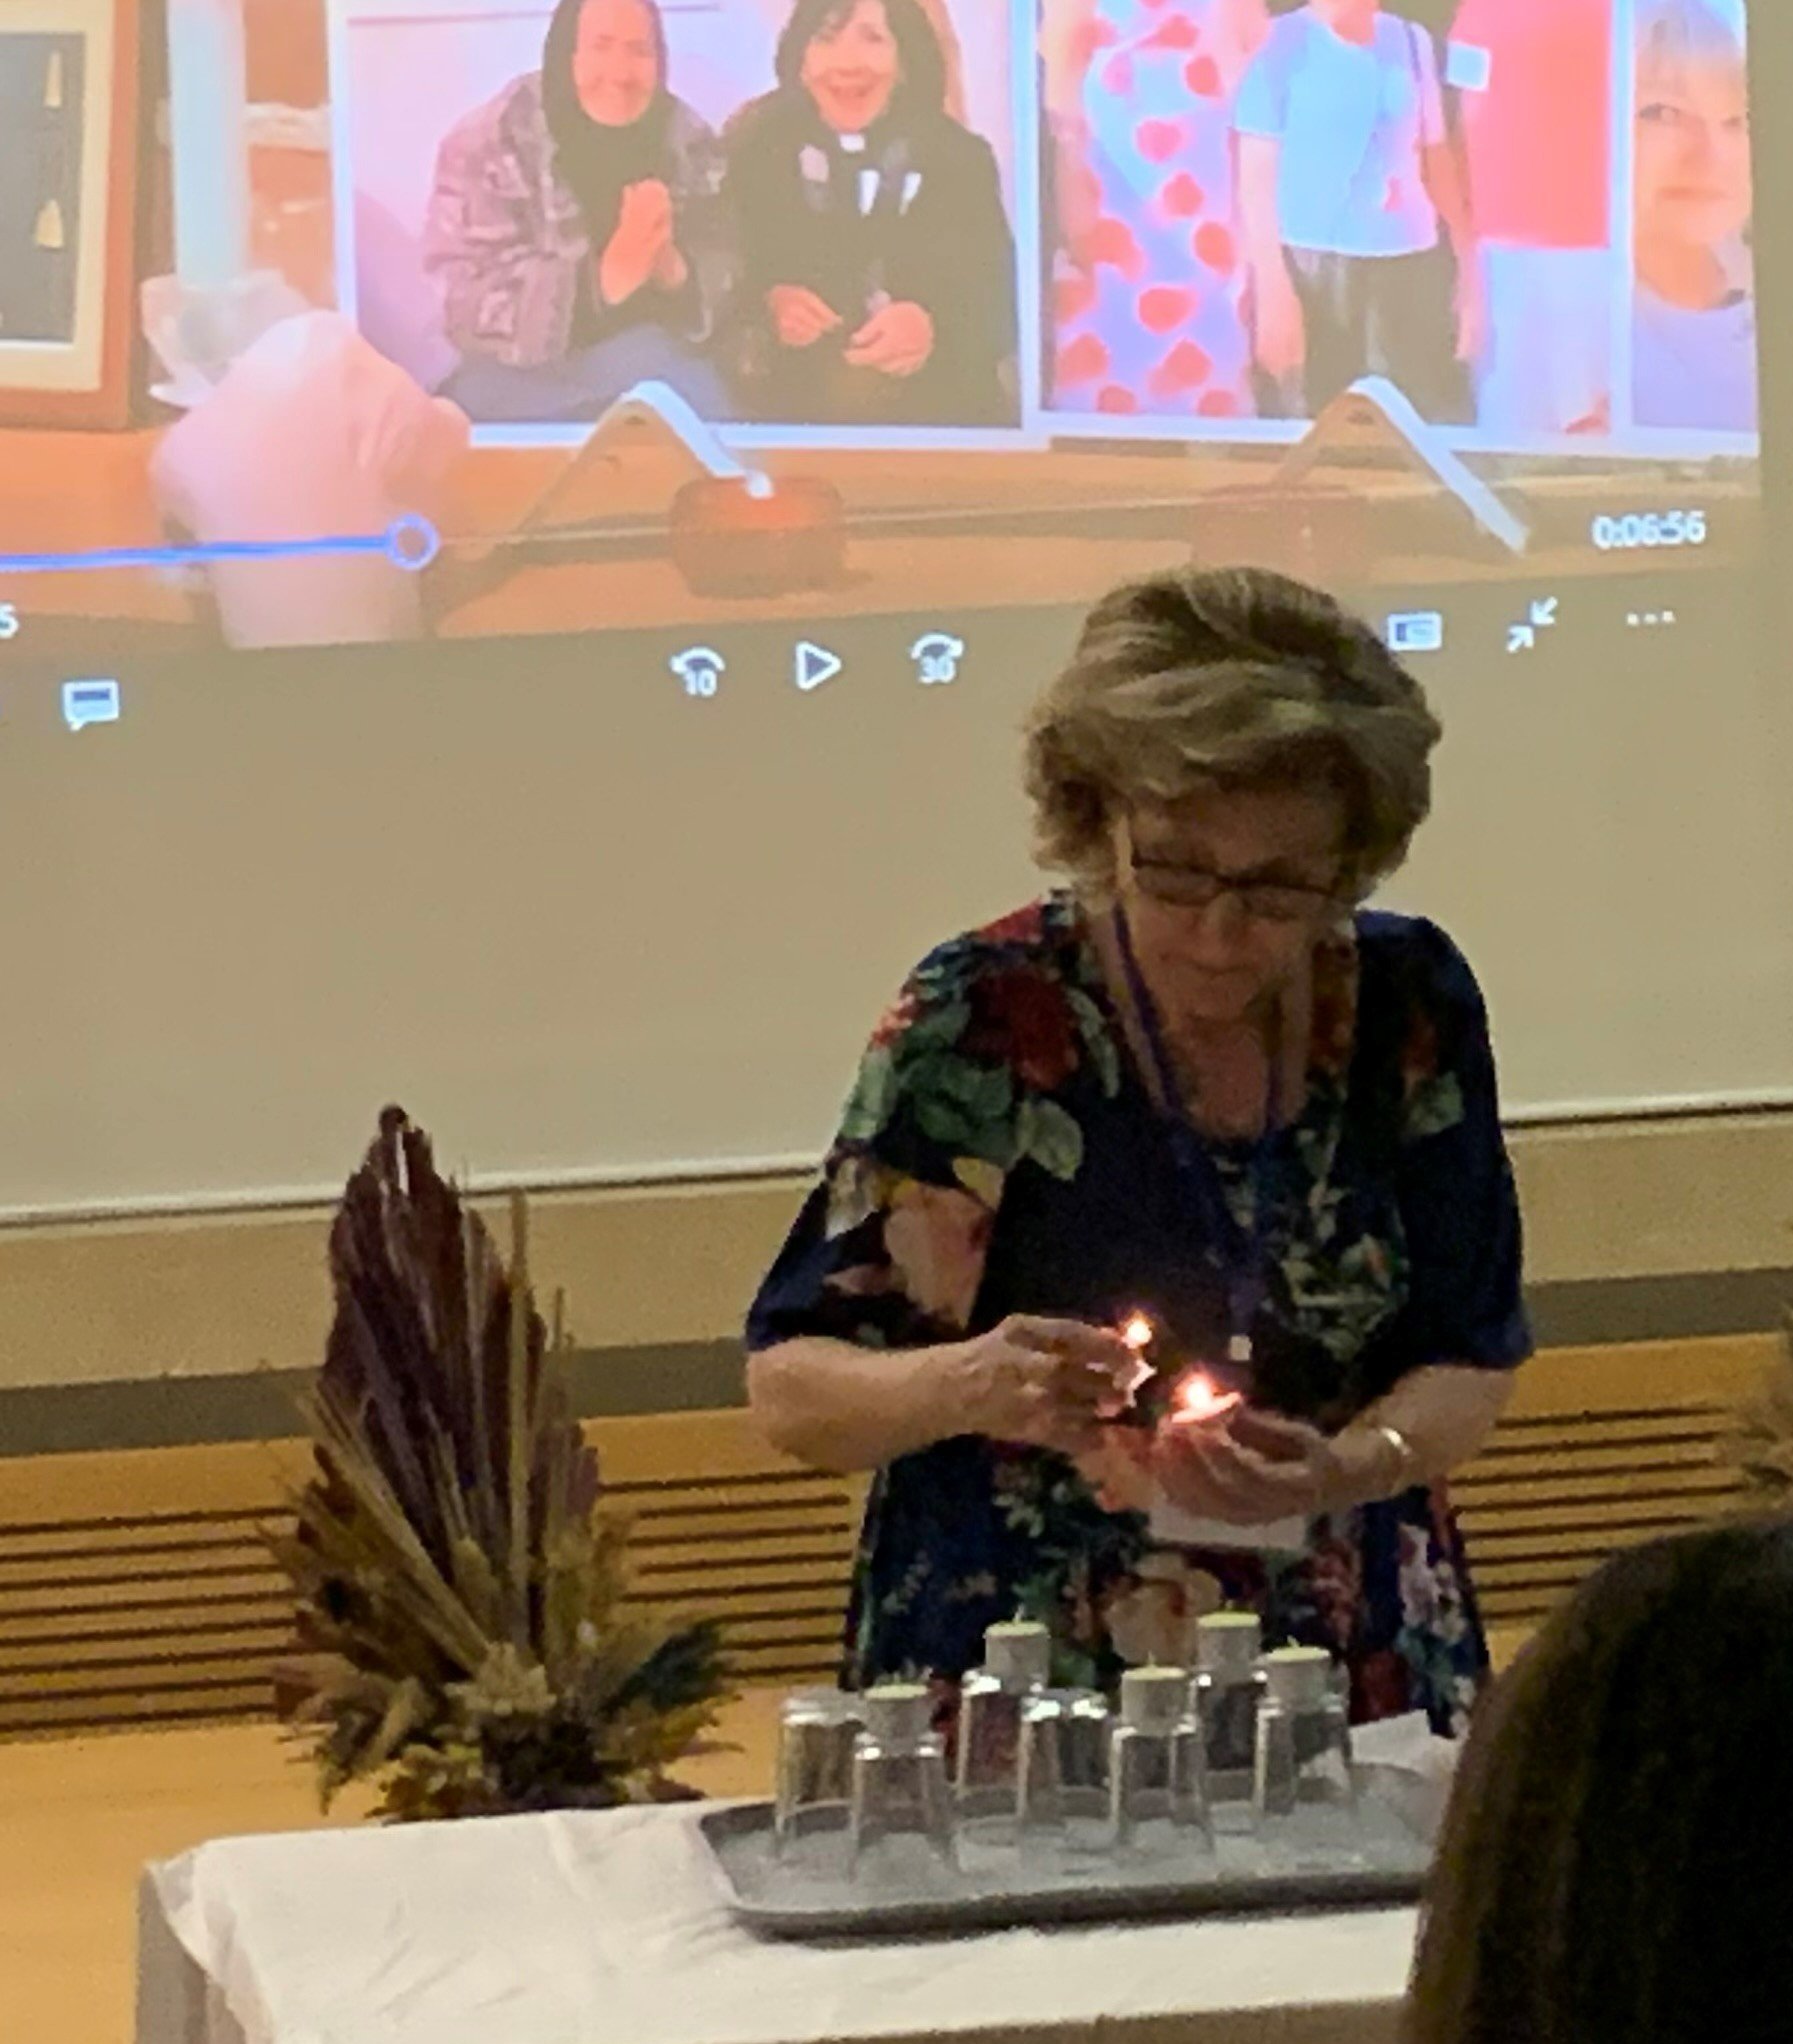   Lighting candles for a memorial service  